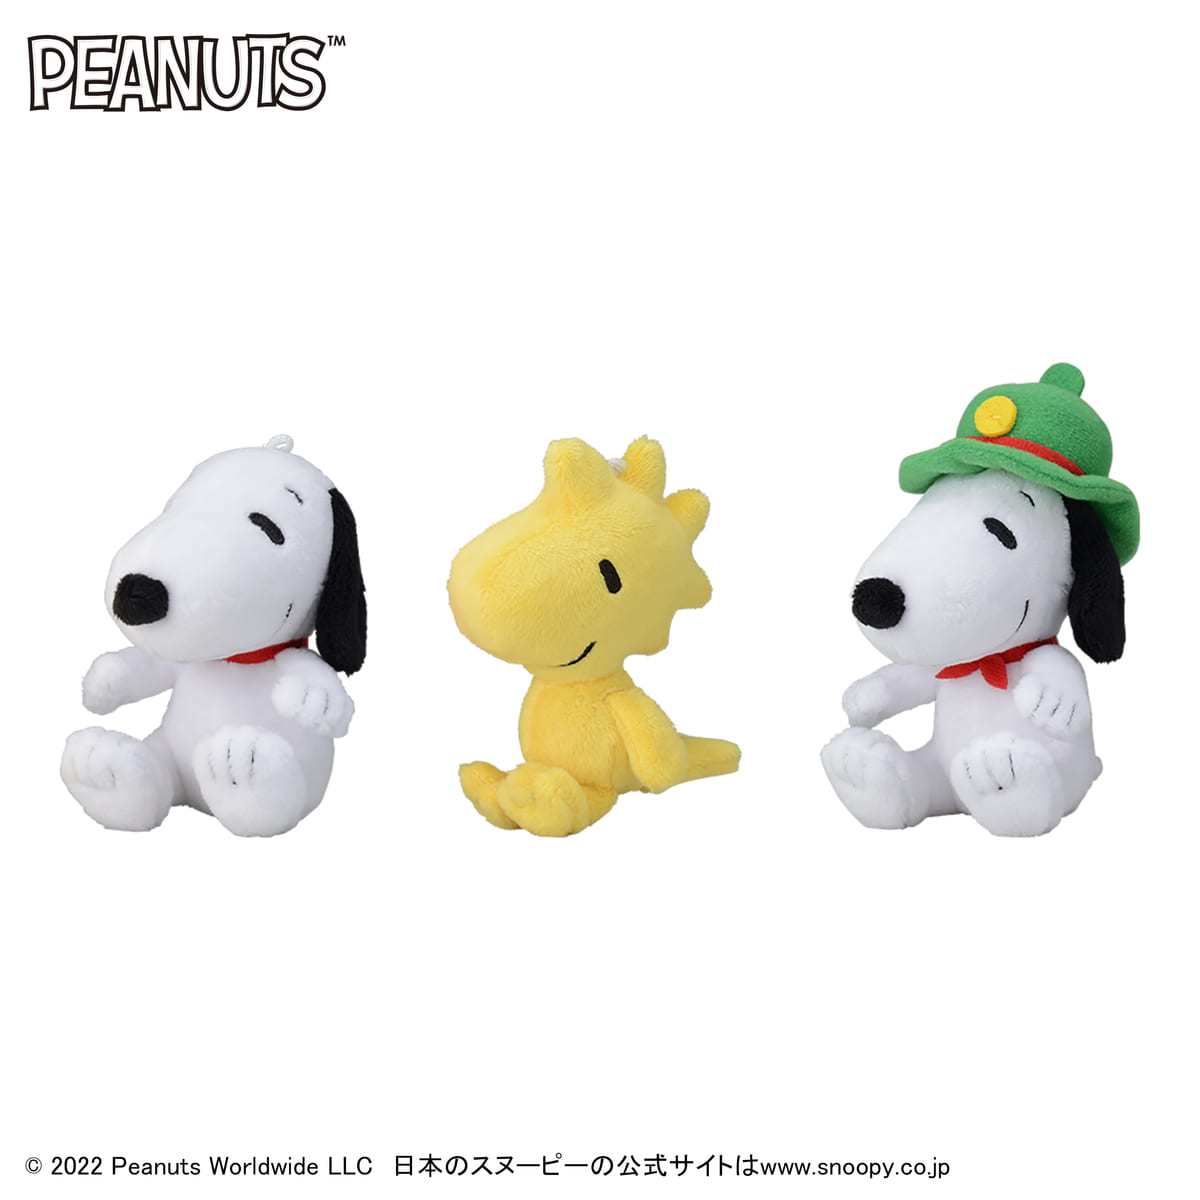 SNOOPY™　BOOK IN SERIES　ミニぬいぐるみ